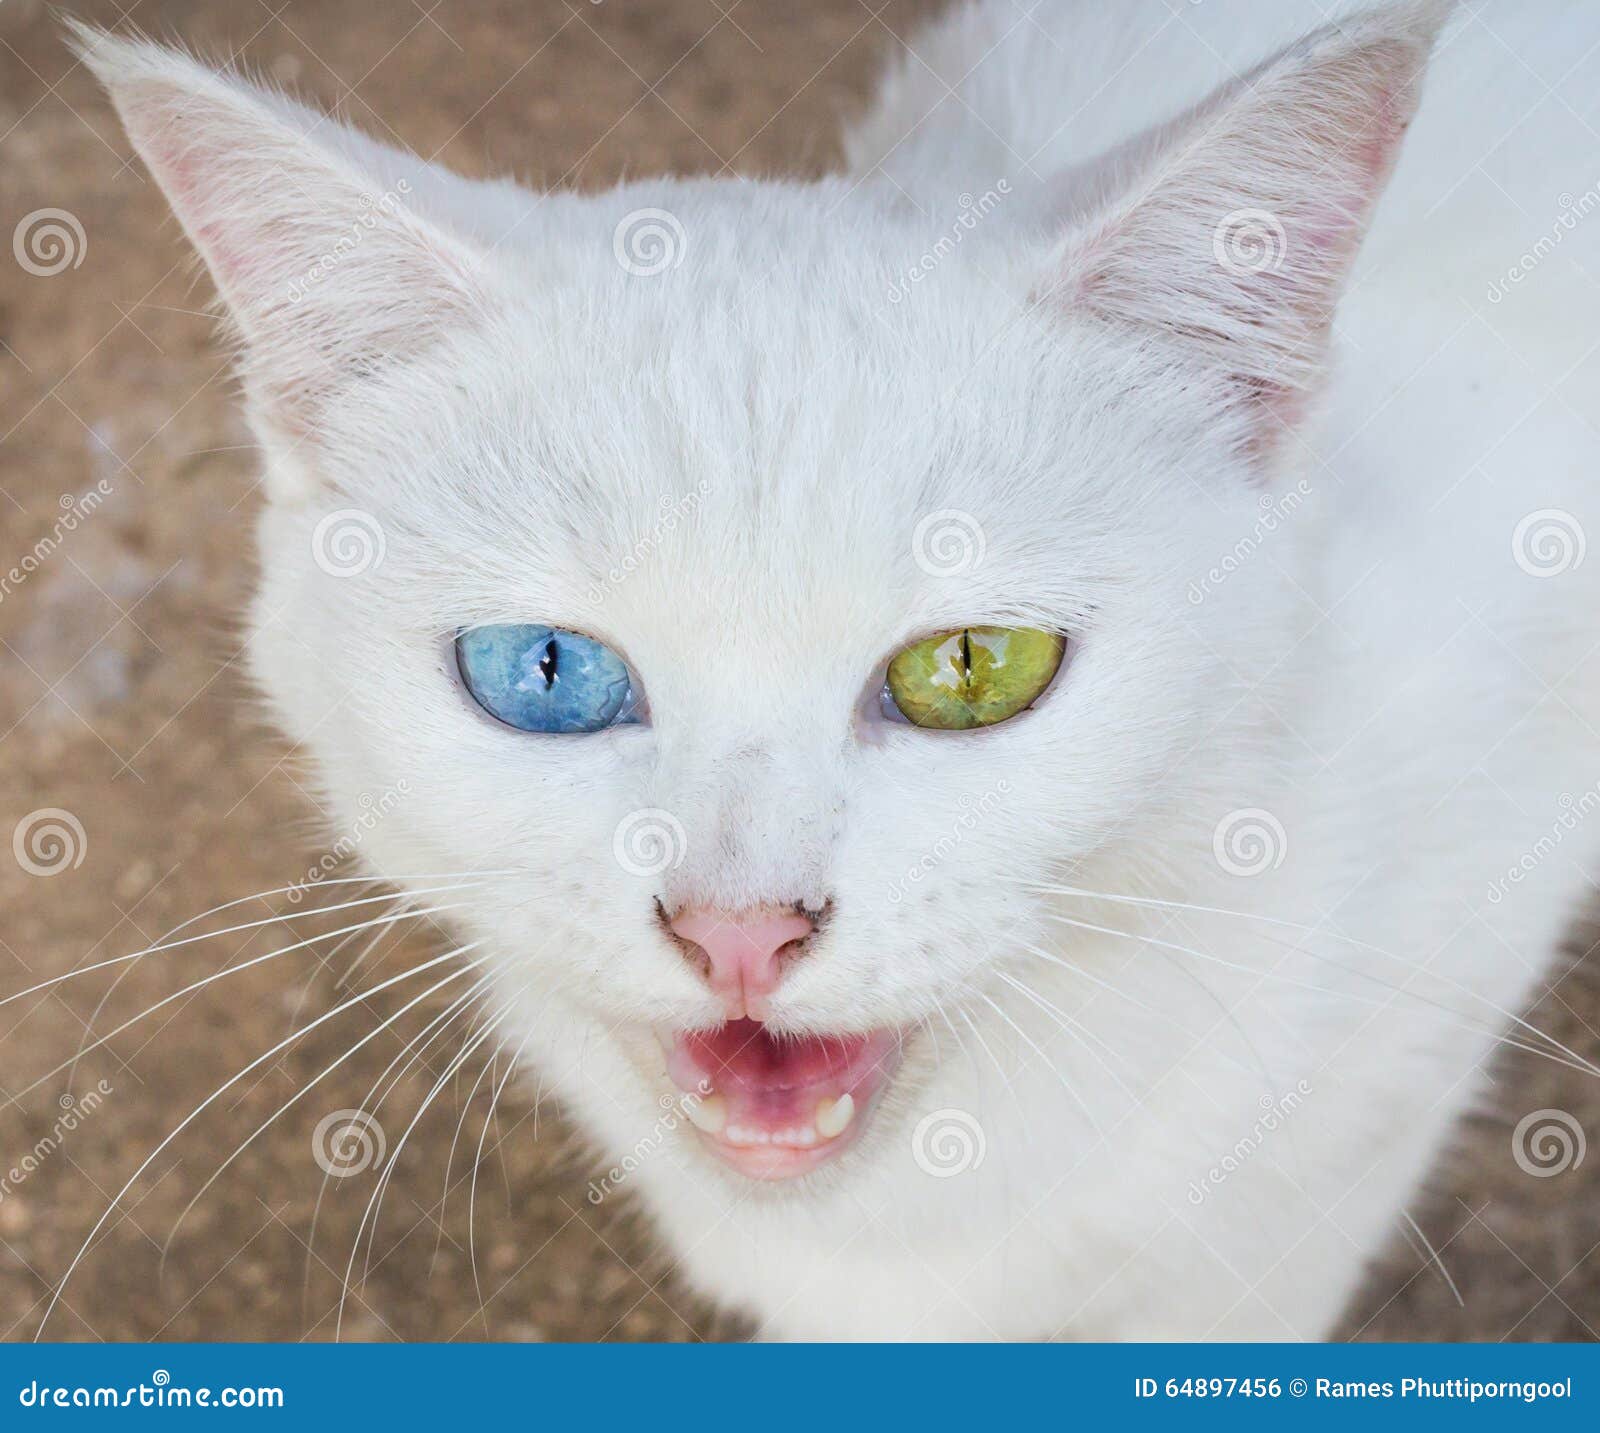 White Cat Eye Color stock photo. Image of nose, face ...